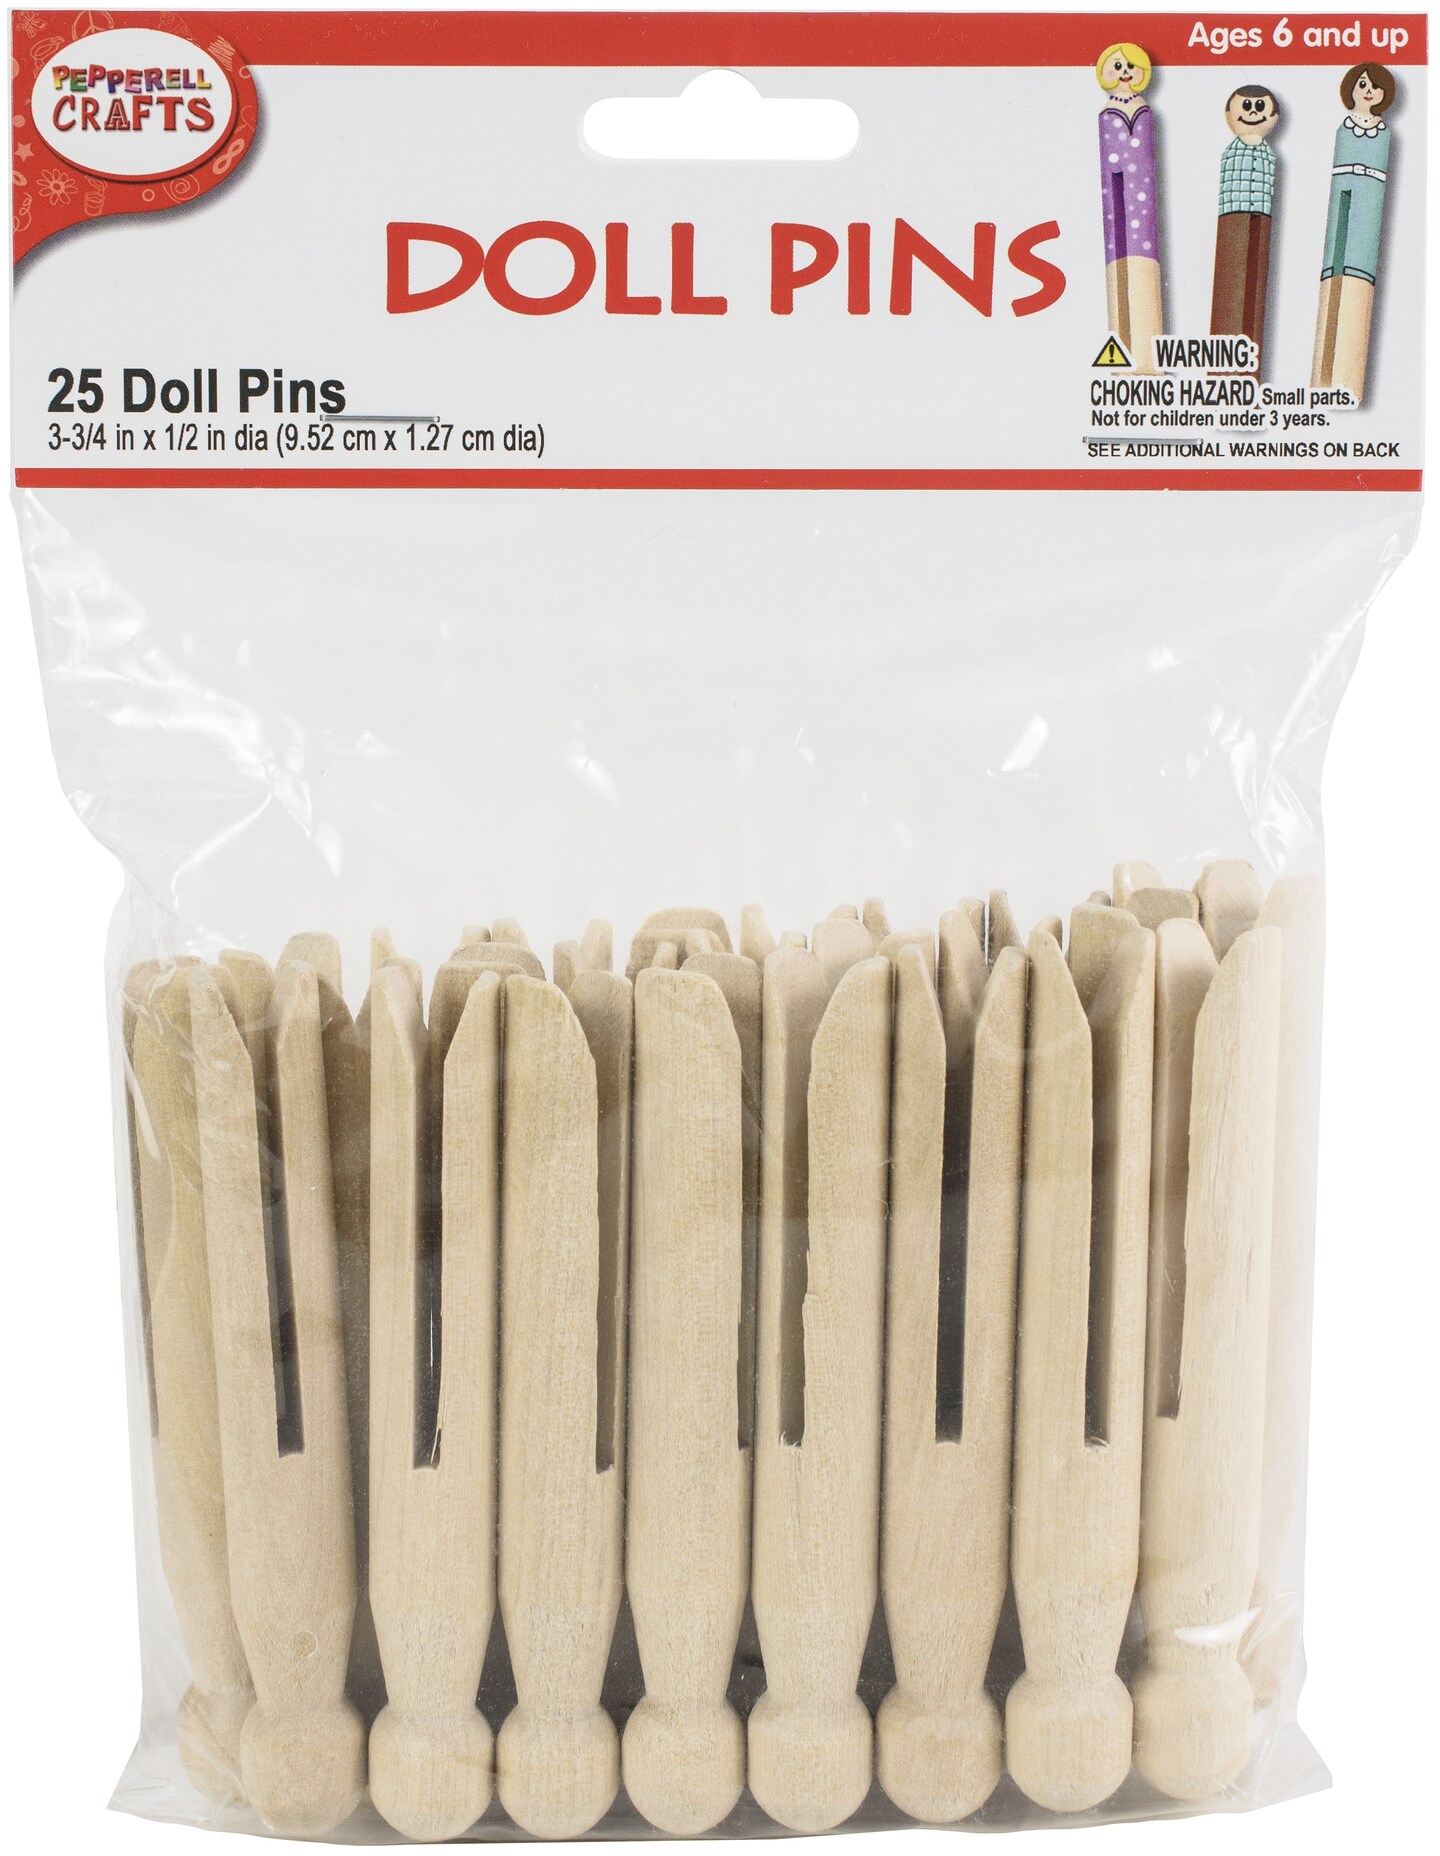 Pin on Doll Crafts